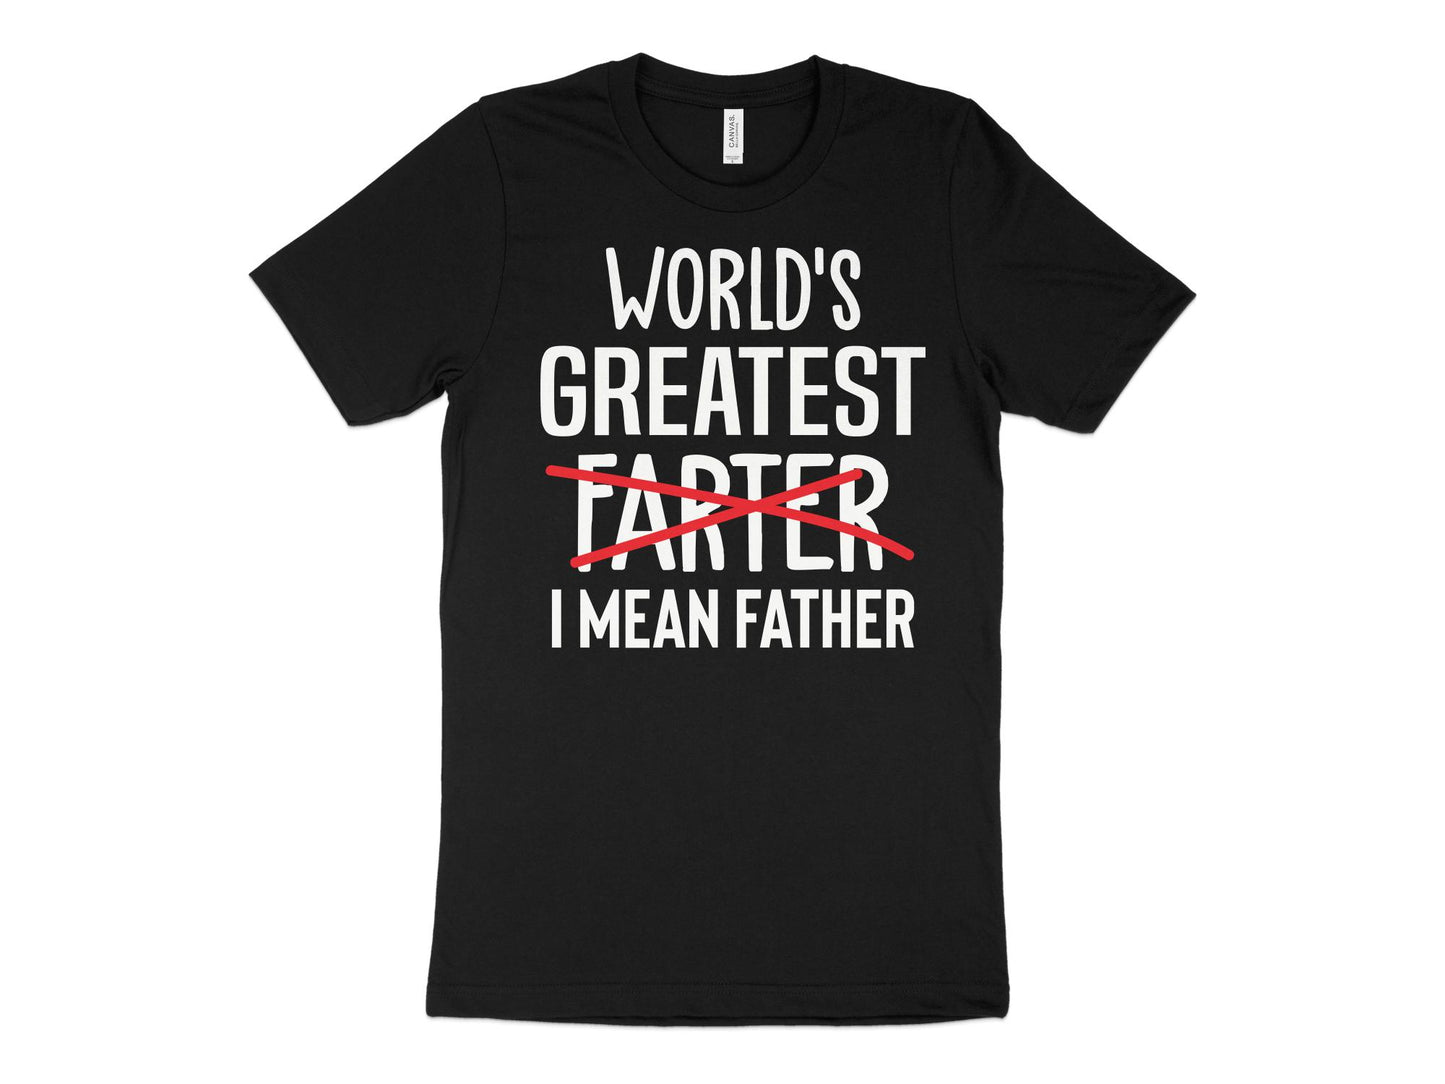 World's Greatest Farter I Mean Father Shirt, black